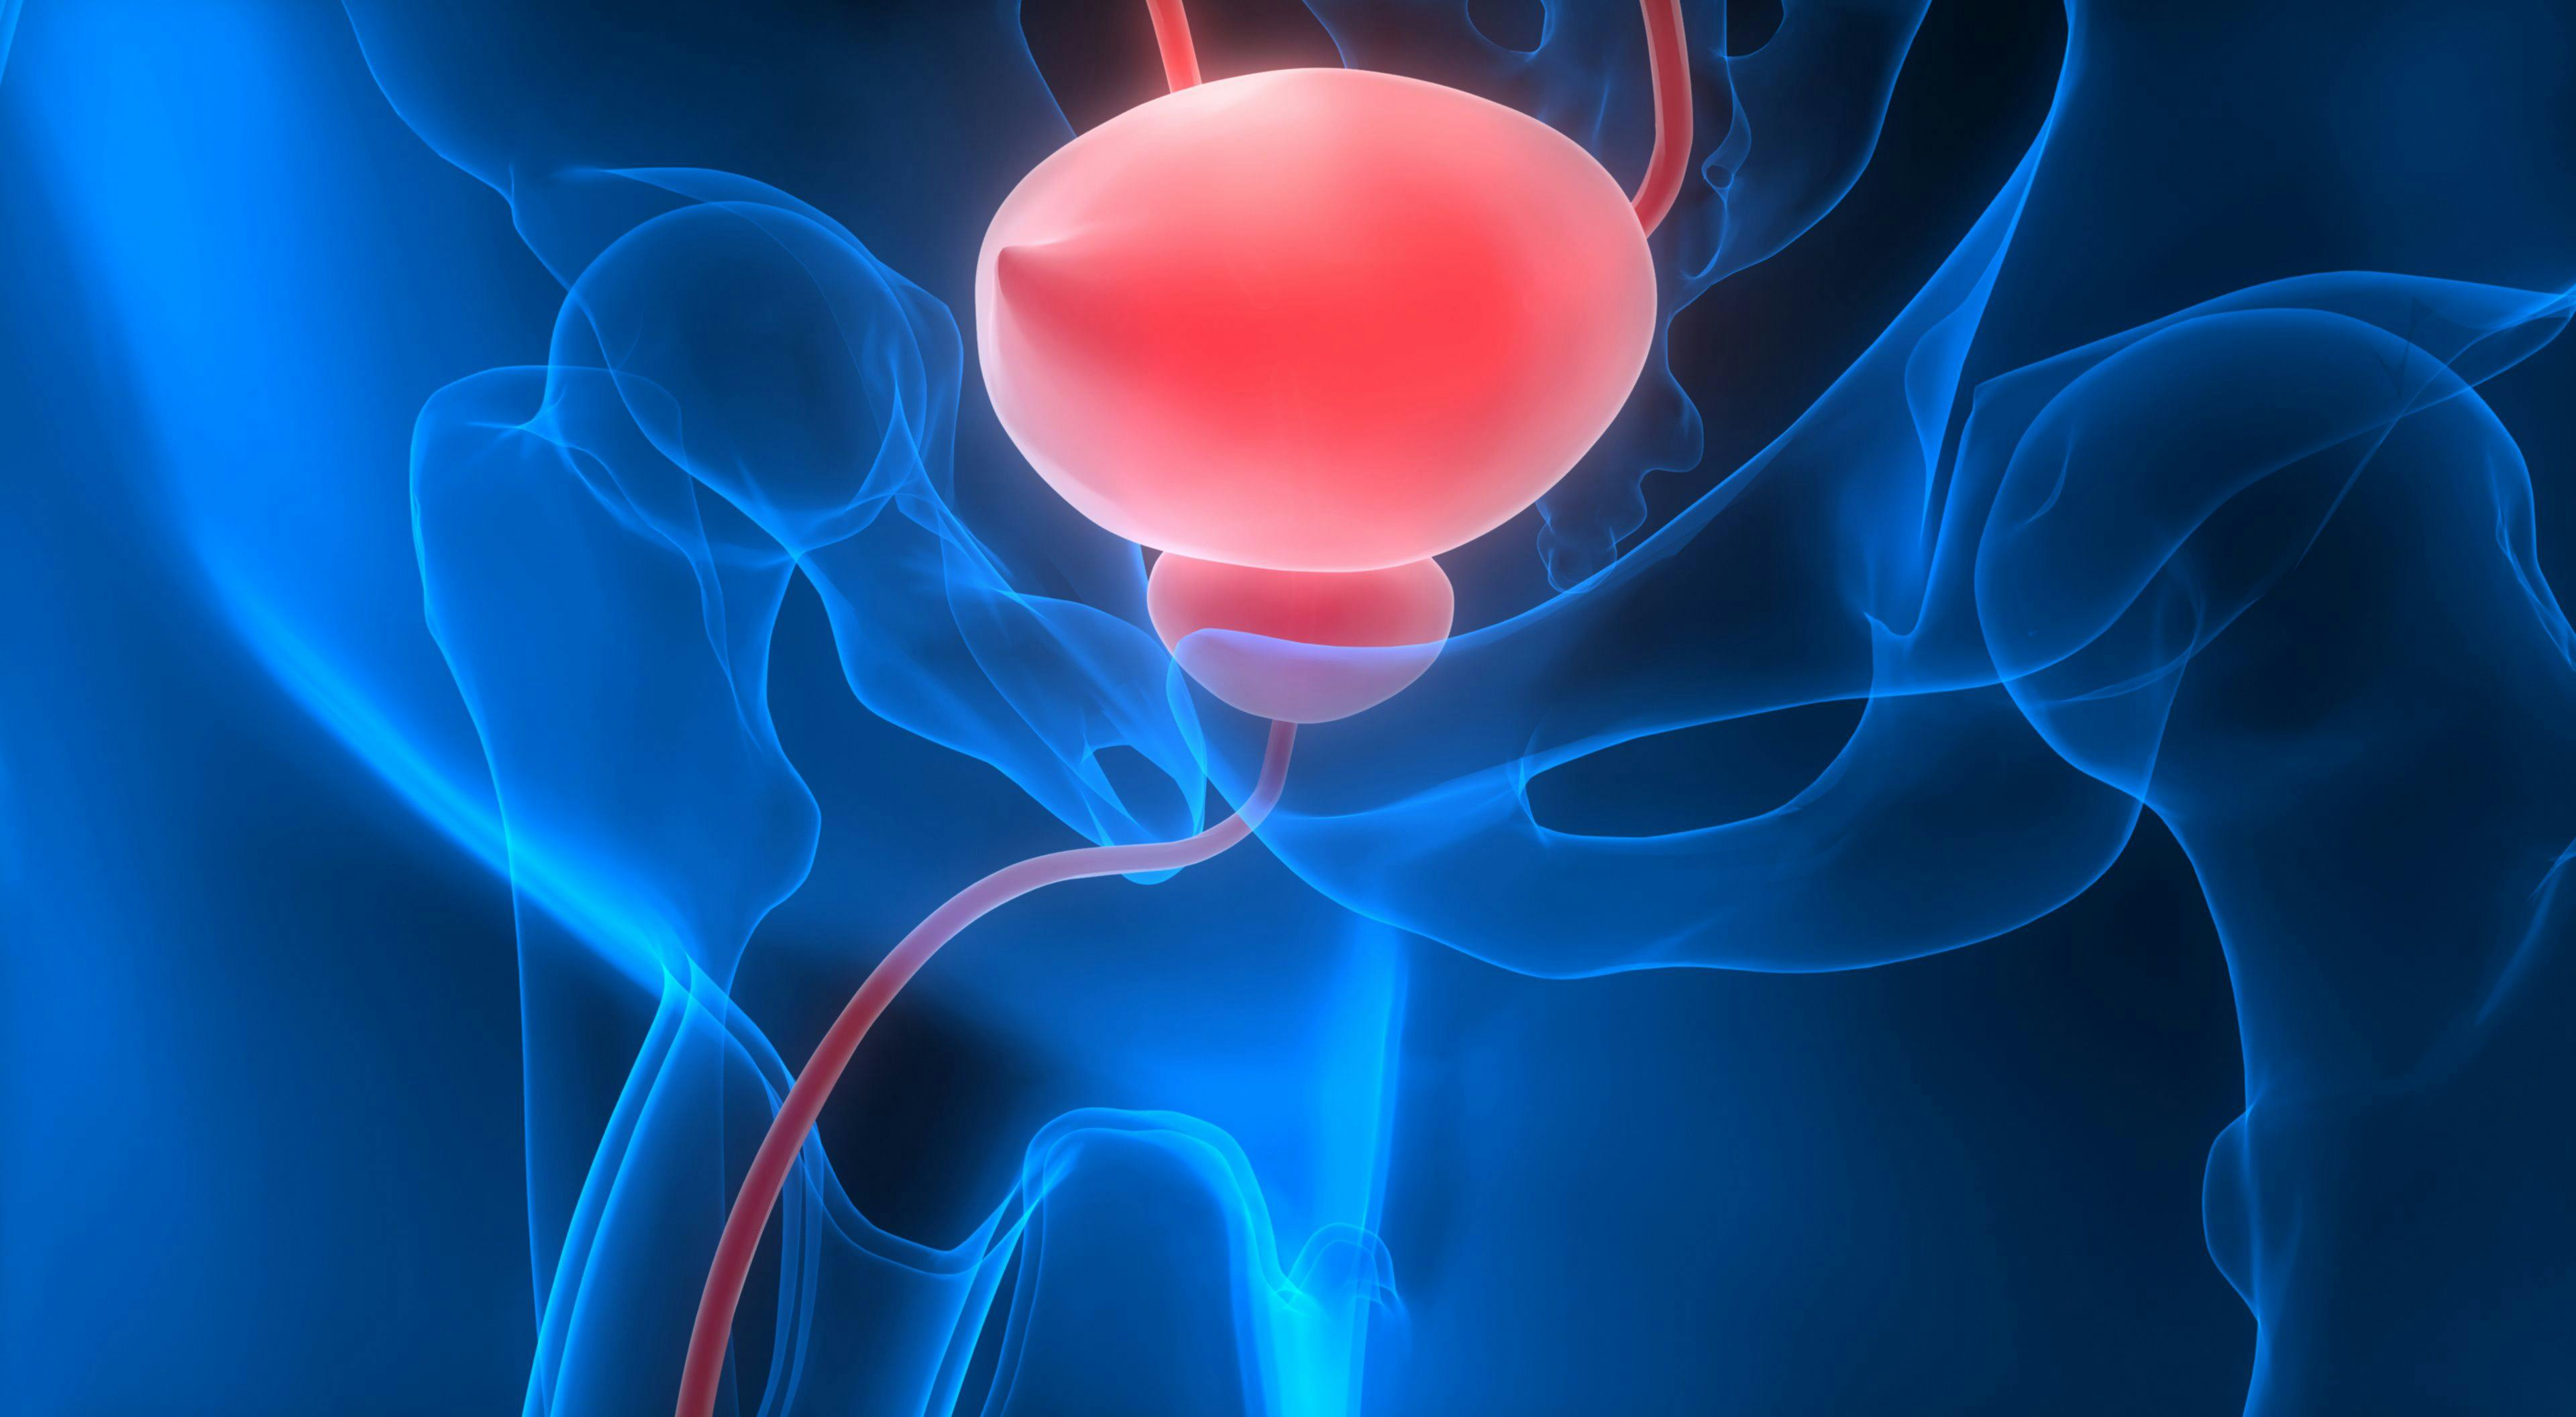 Image of a bladder highlighted in red.